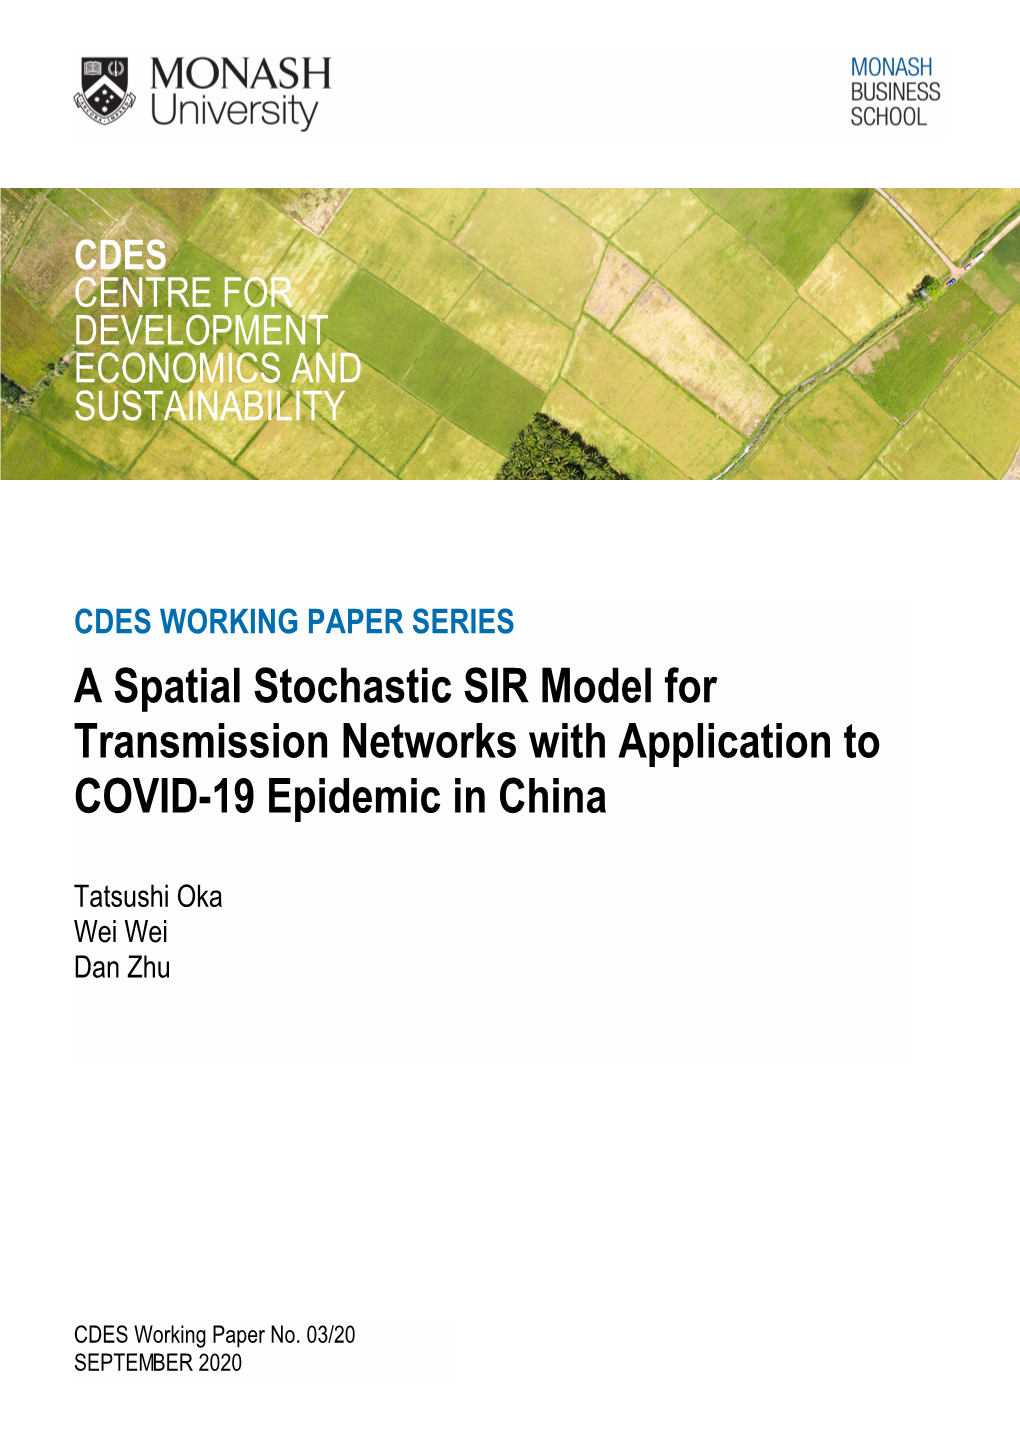 A Spatial Stochastic SIR Model for Transmission Networks with Application to COVID-19 Epidemic in China